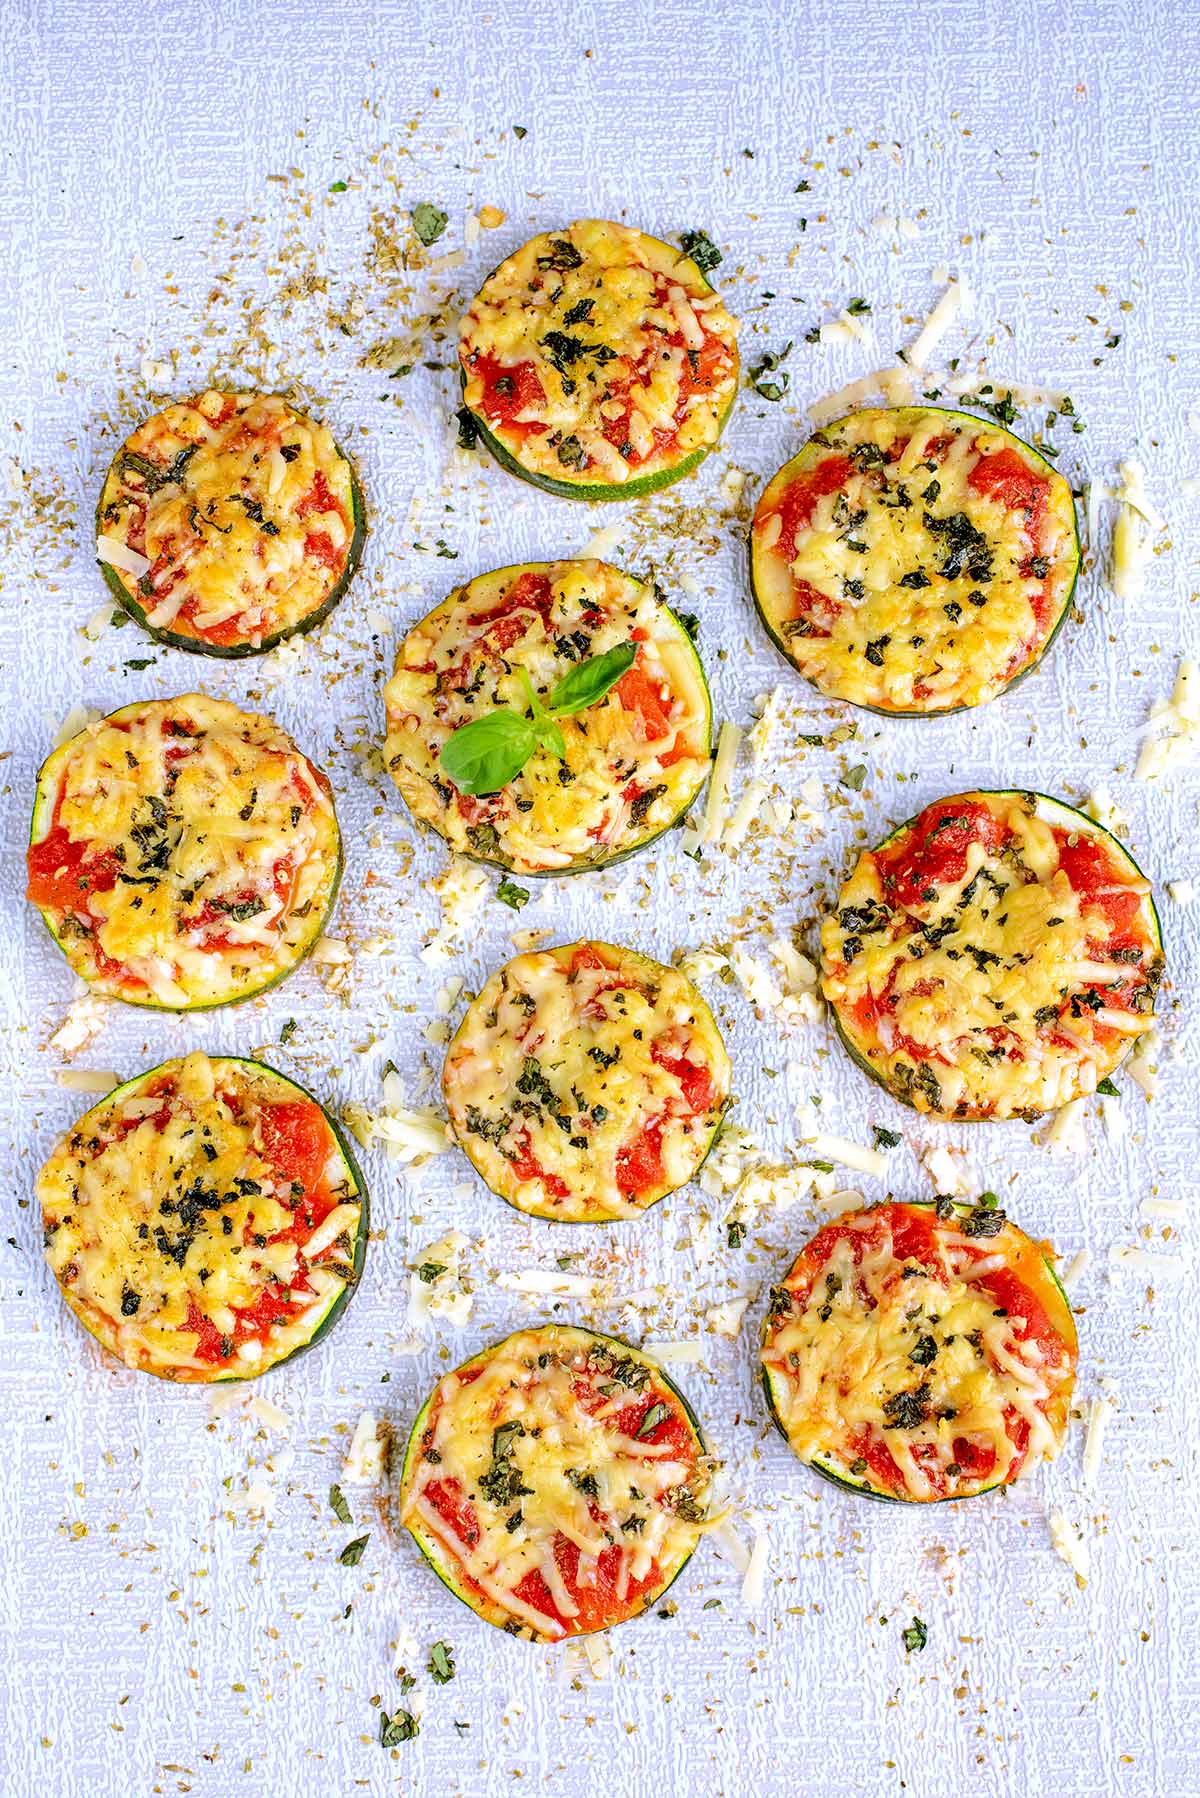 Cooked courgette pizza bites with melted cheese.